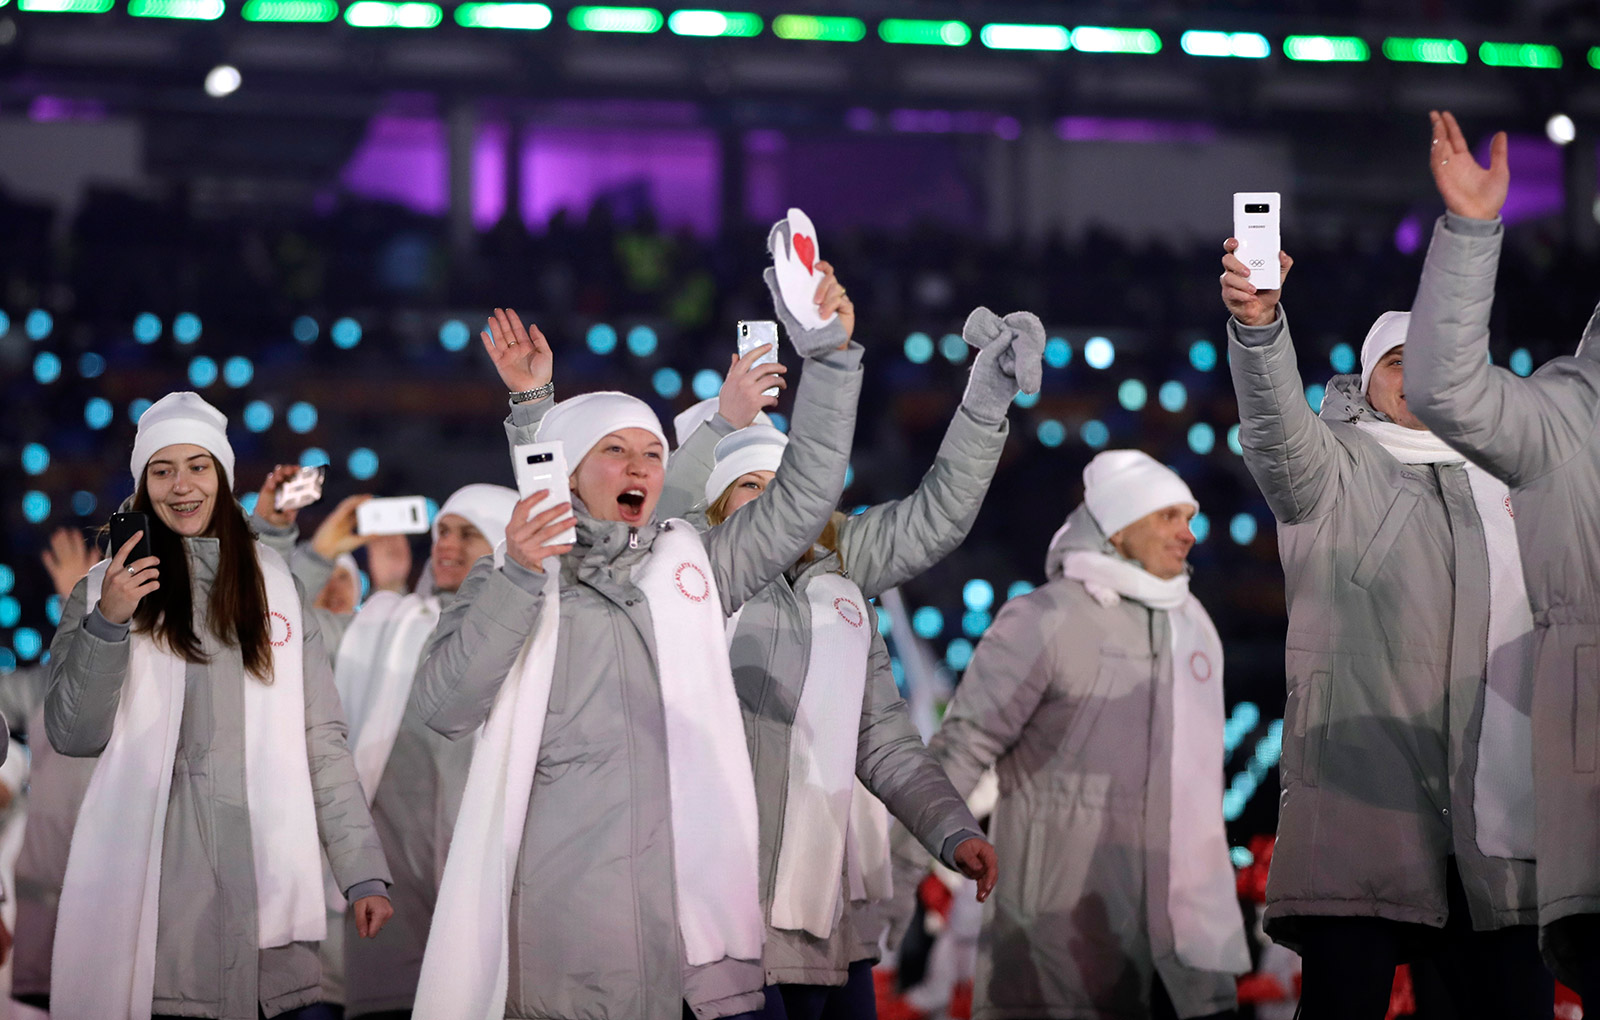 The best photos of the 2018 Winter Olympics